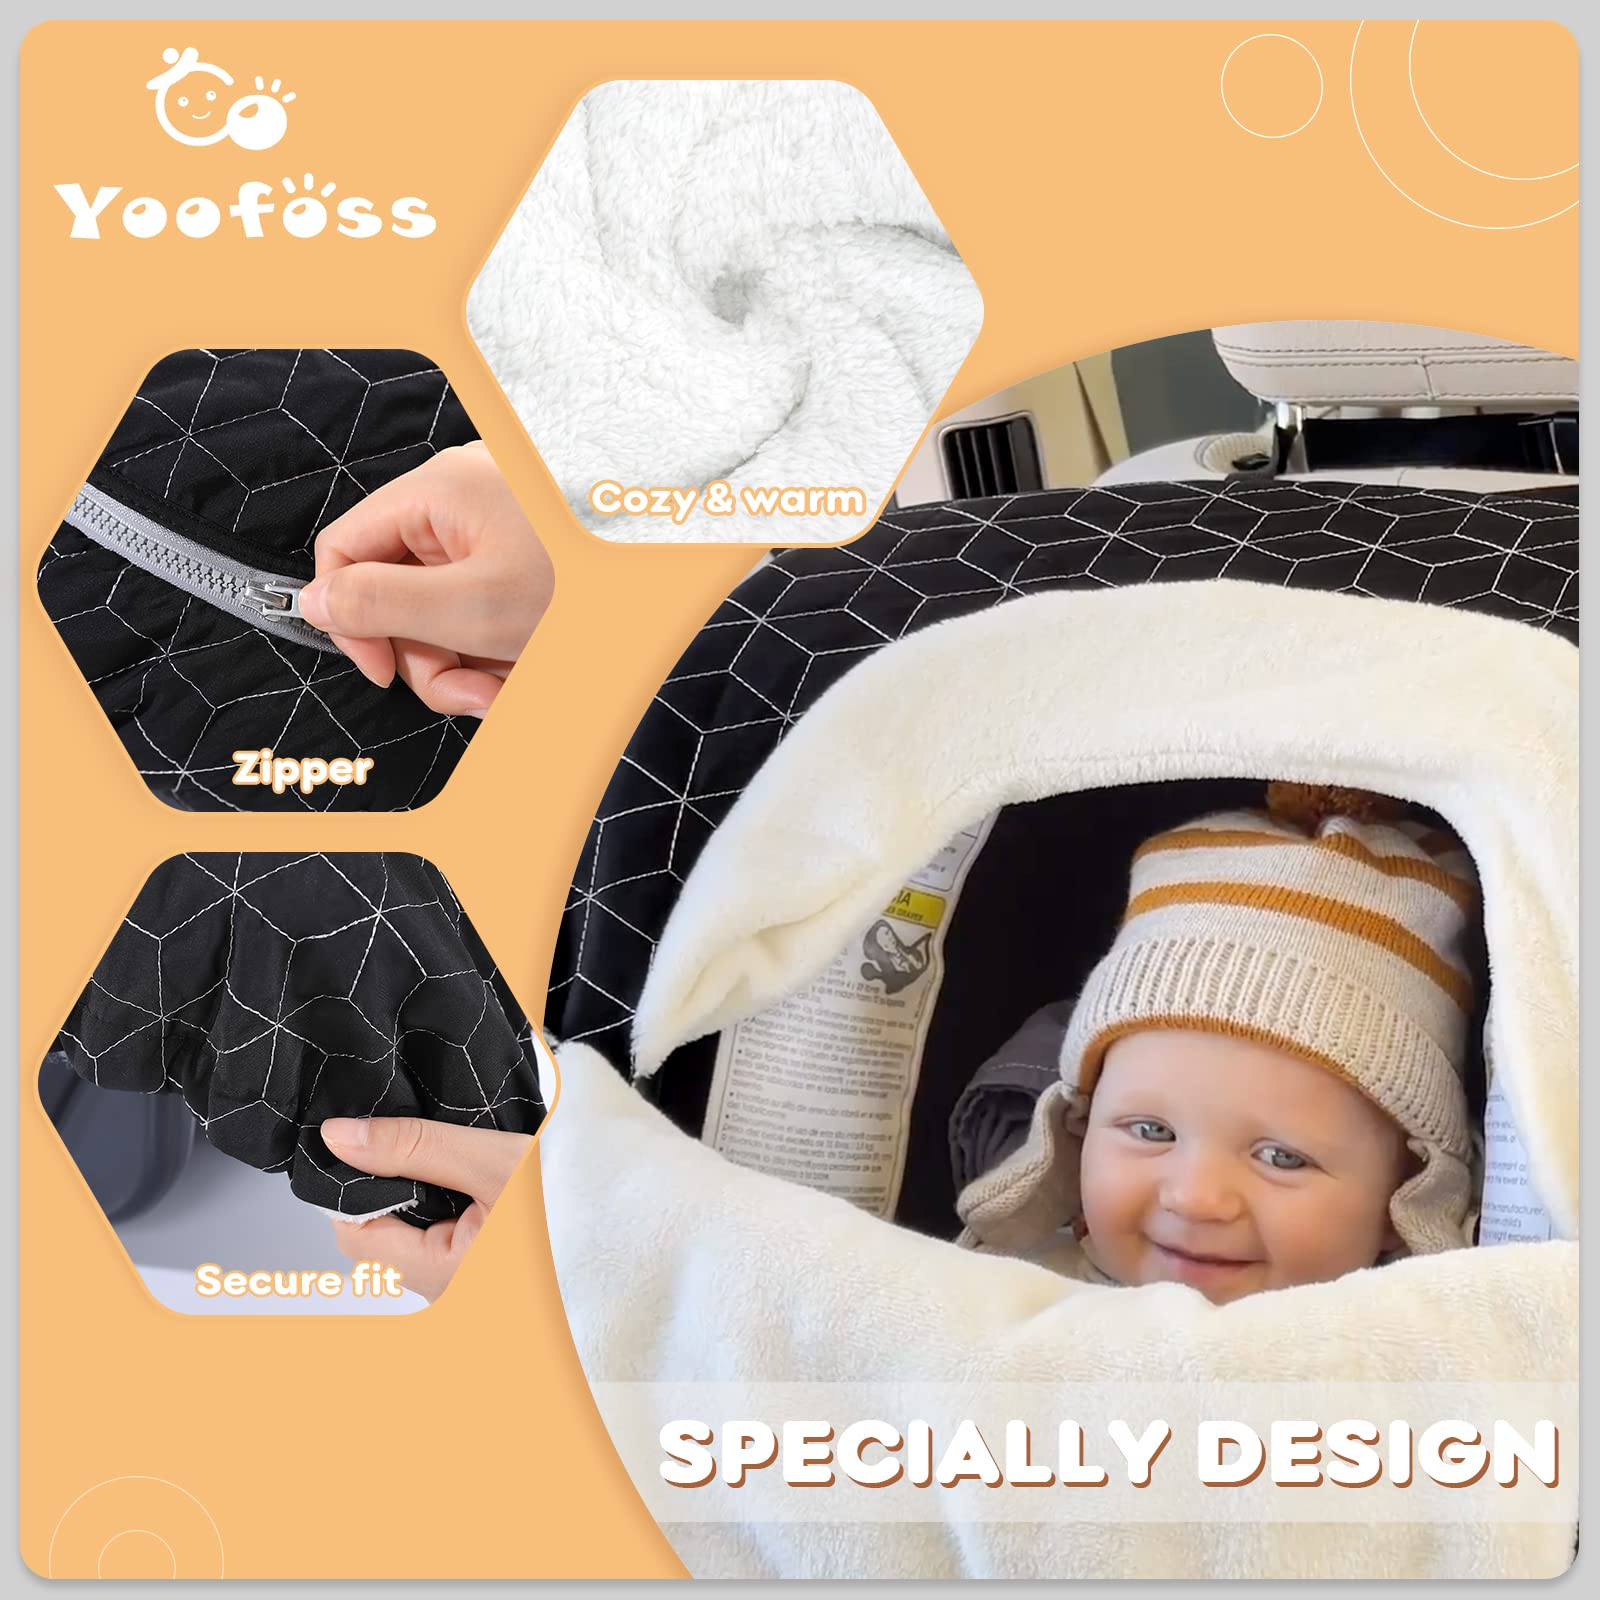 Yoofoss Baby Car Seat Cover Winter Carseat Canopies Cover to Protect Baby from Cold Wind, Super Warm Plush Fleece Baby Carrier Cover for Infant Boys Girls (Black)